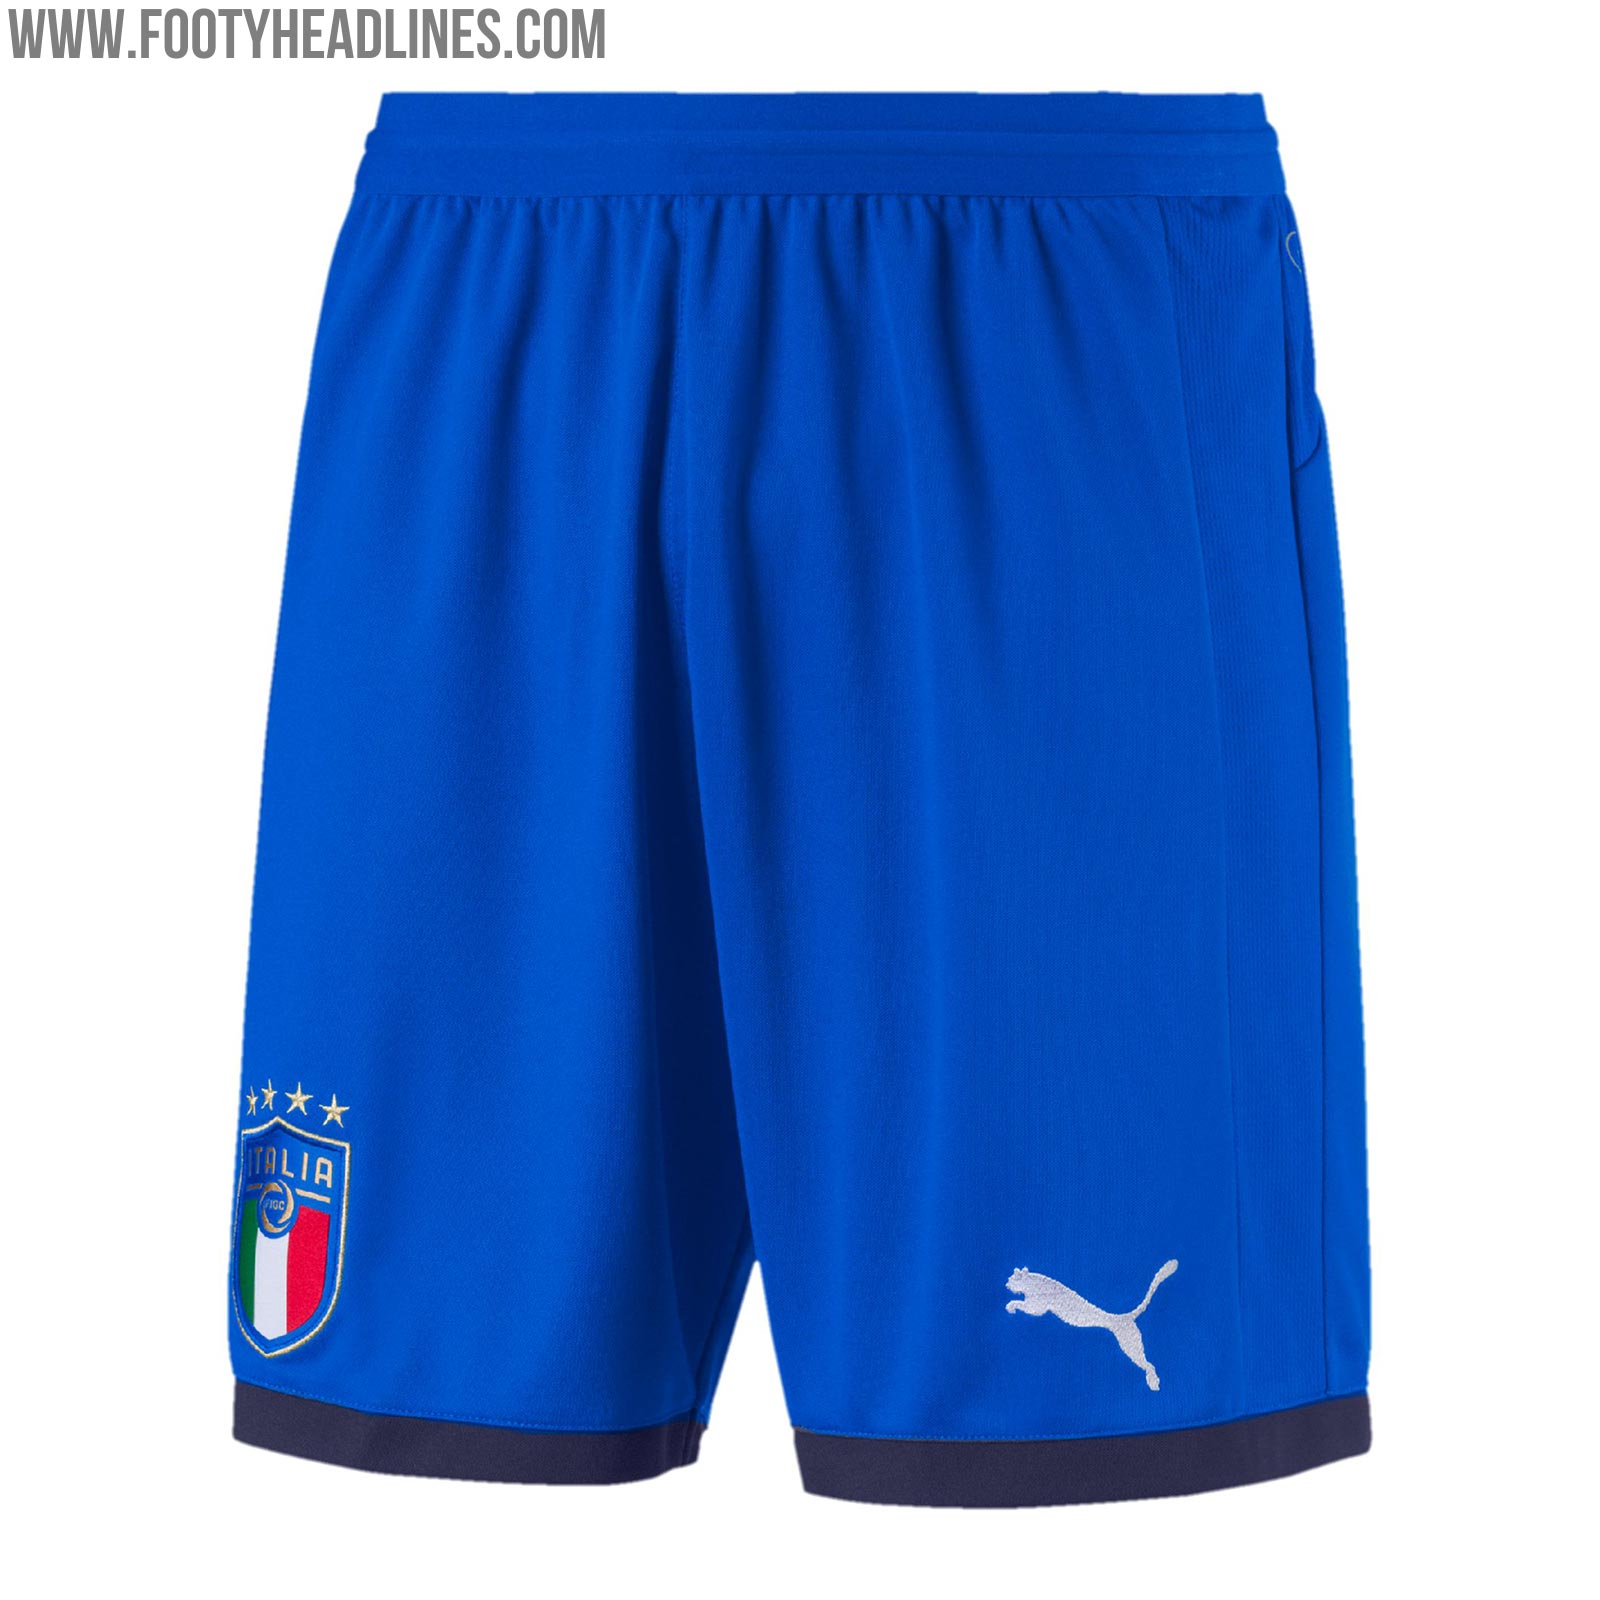 italy-2018-world-cup-home-kit-3.jpg